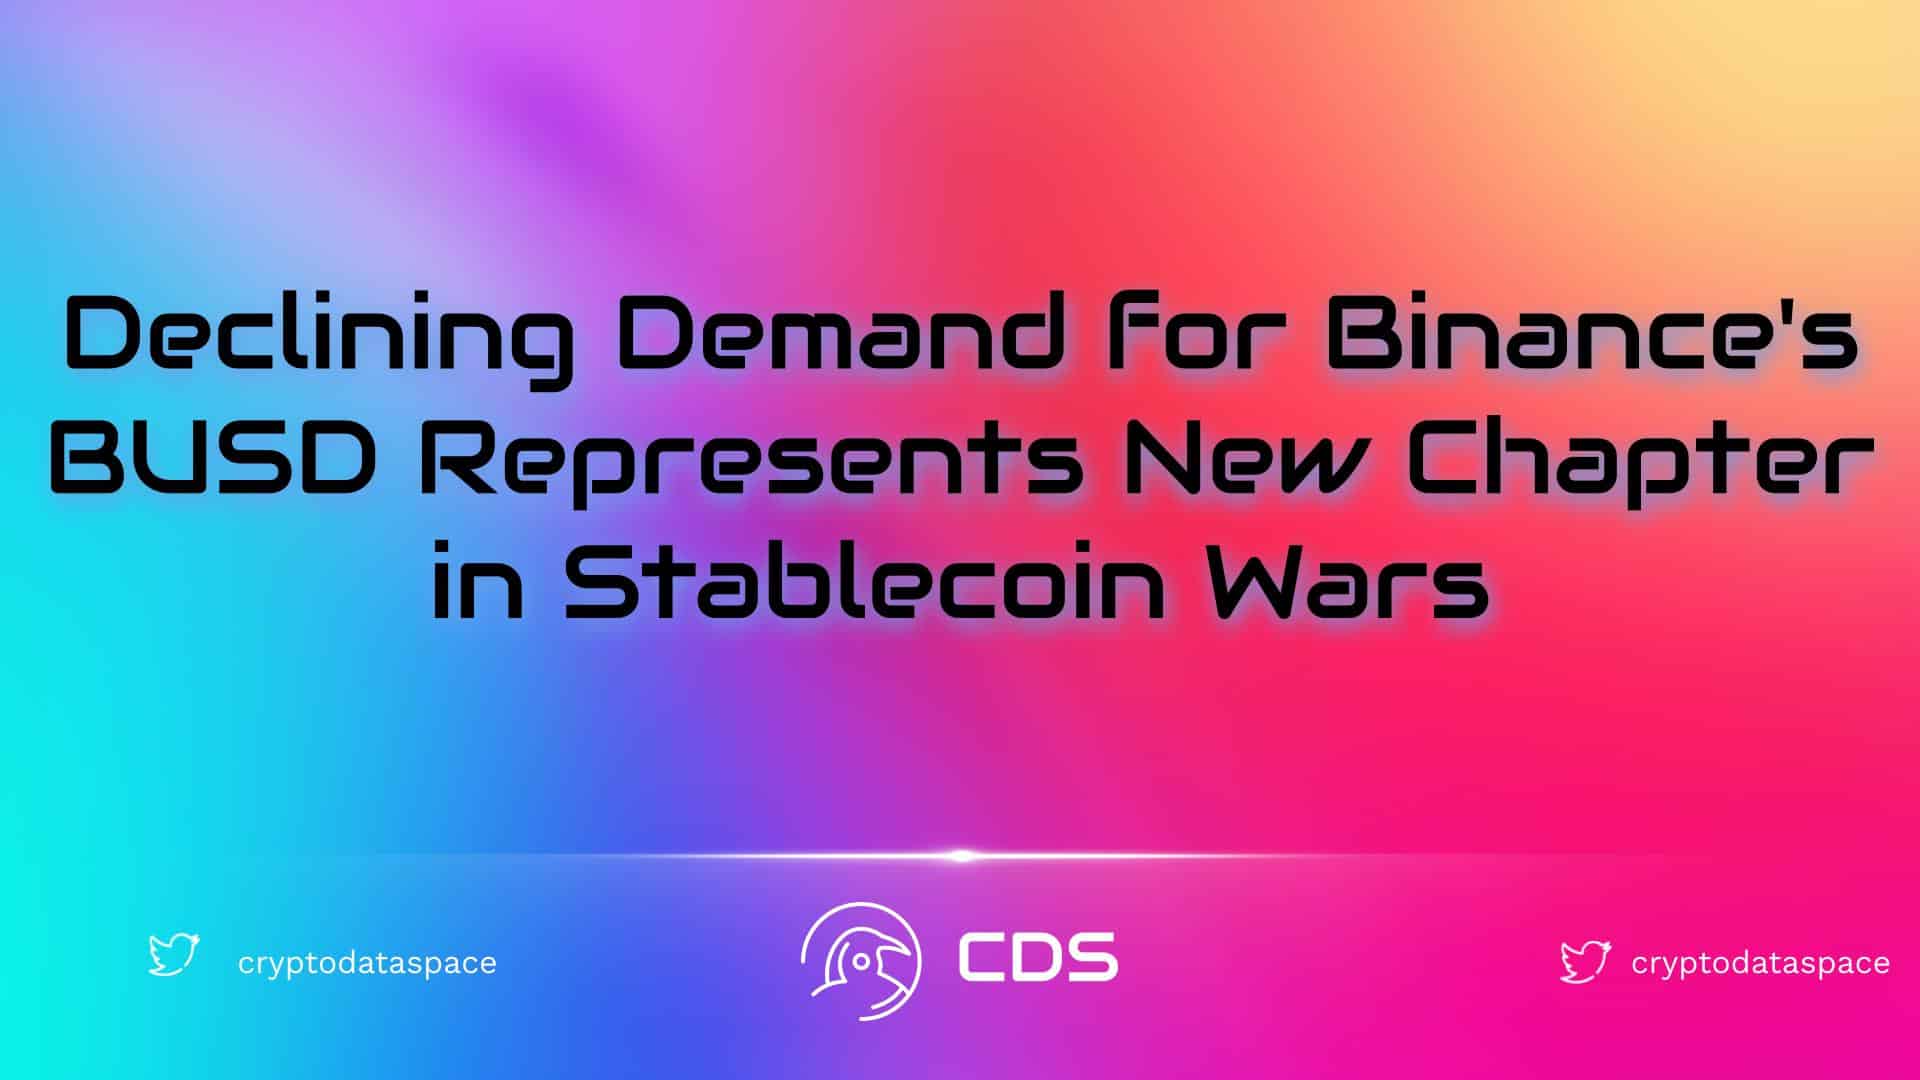 Declining Demand for Binance's BUSD Represents New Chapter in Stablecoin Wars